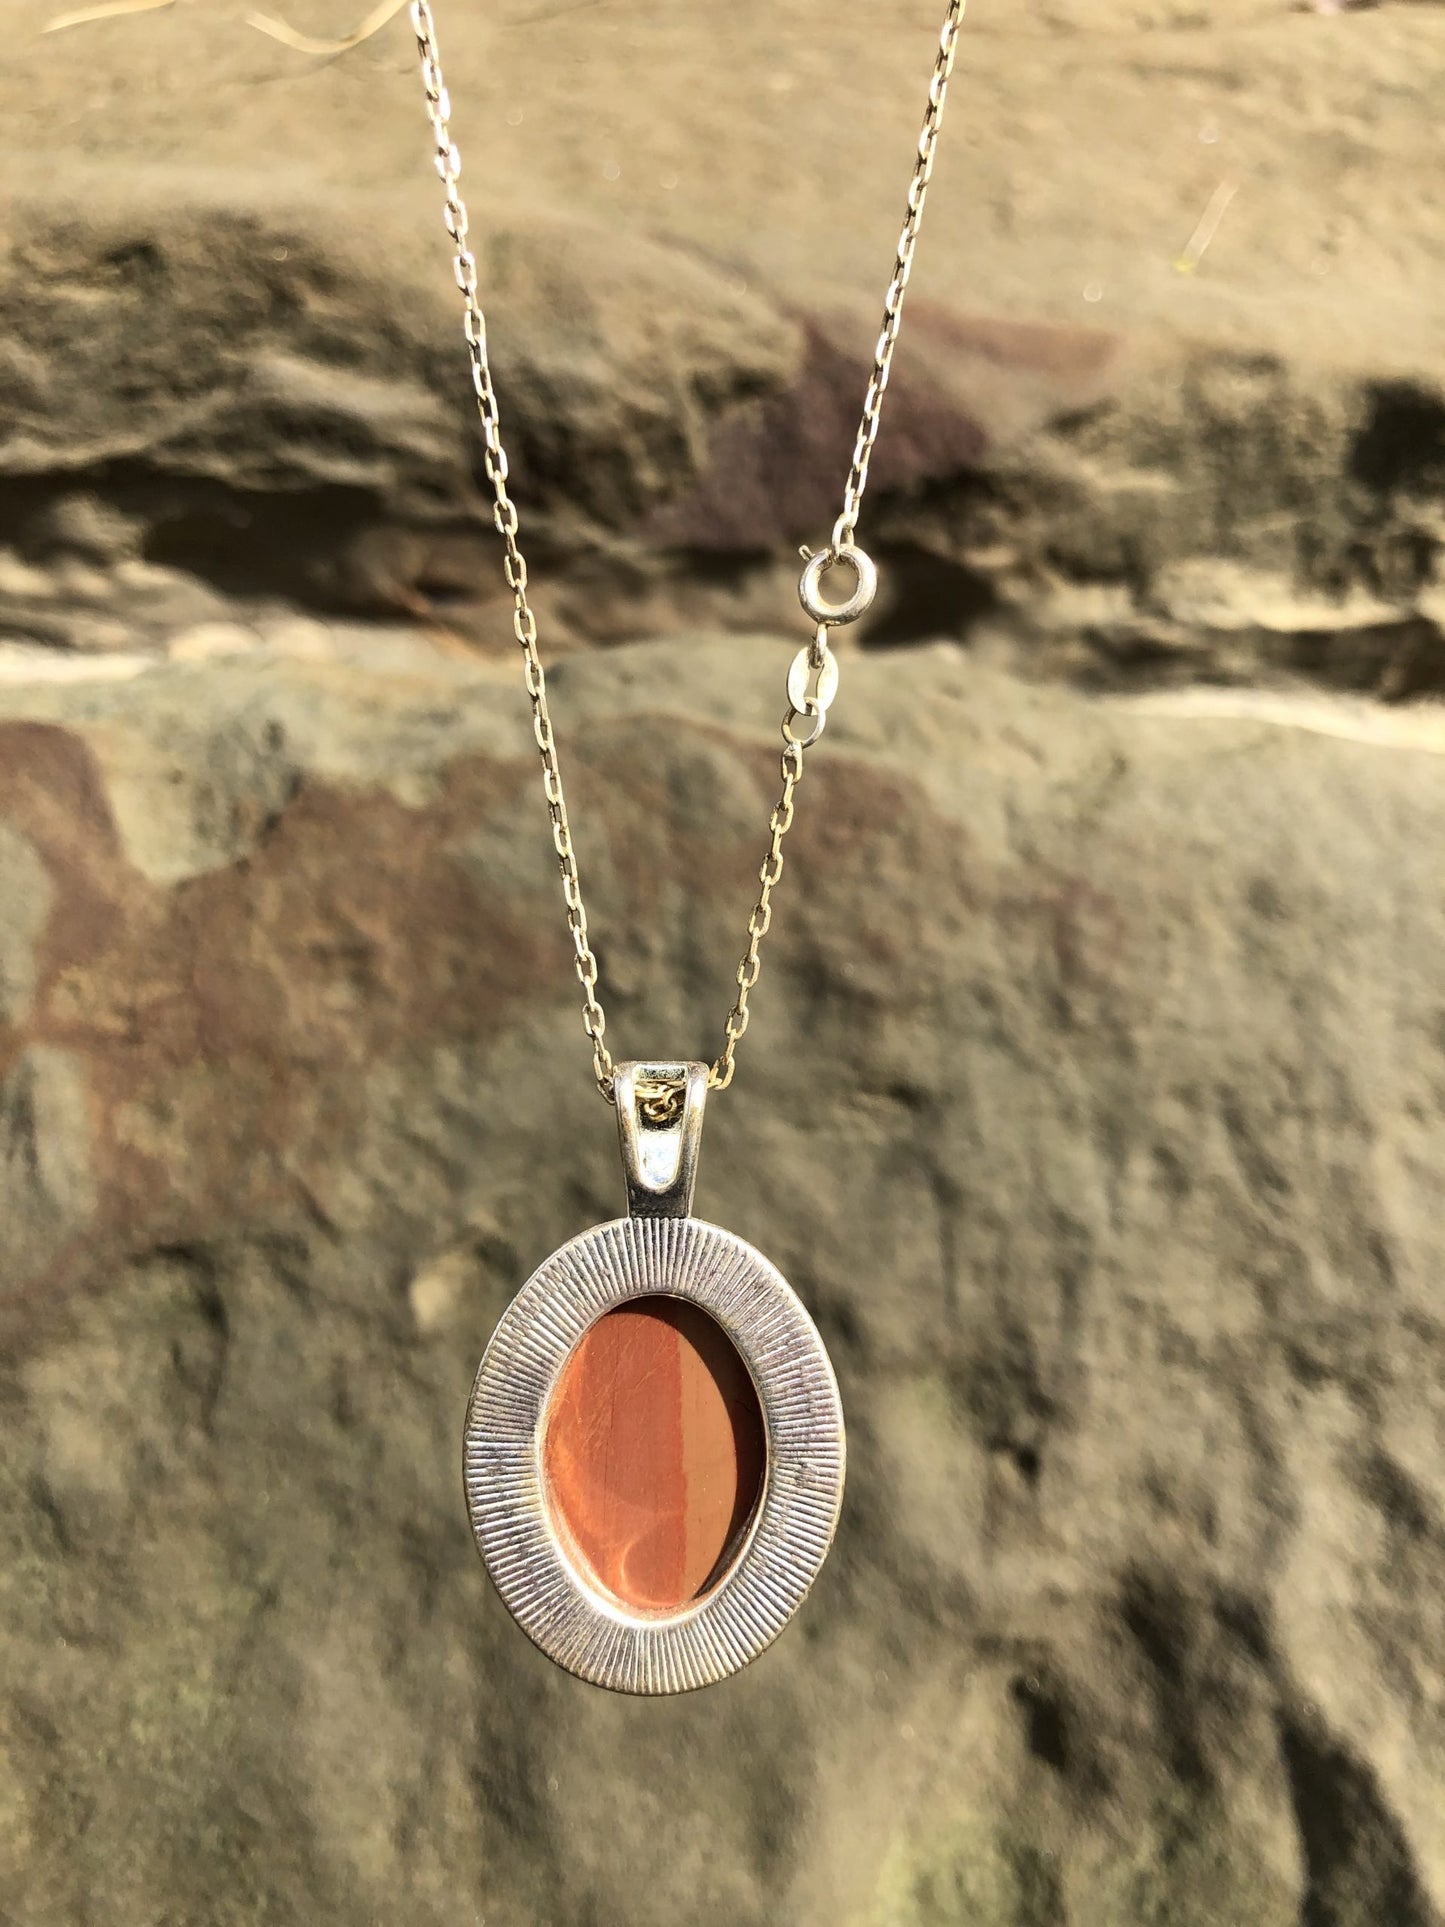 Necklace of Petrified Wood, turned to Jasper, with red and orange hues, from Coromandel, New Zealand, hand polished to a 30x22mm cabochon and set in a silver plated setting with 19 inch chain, back